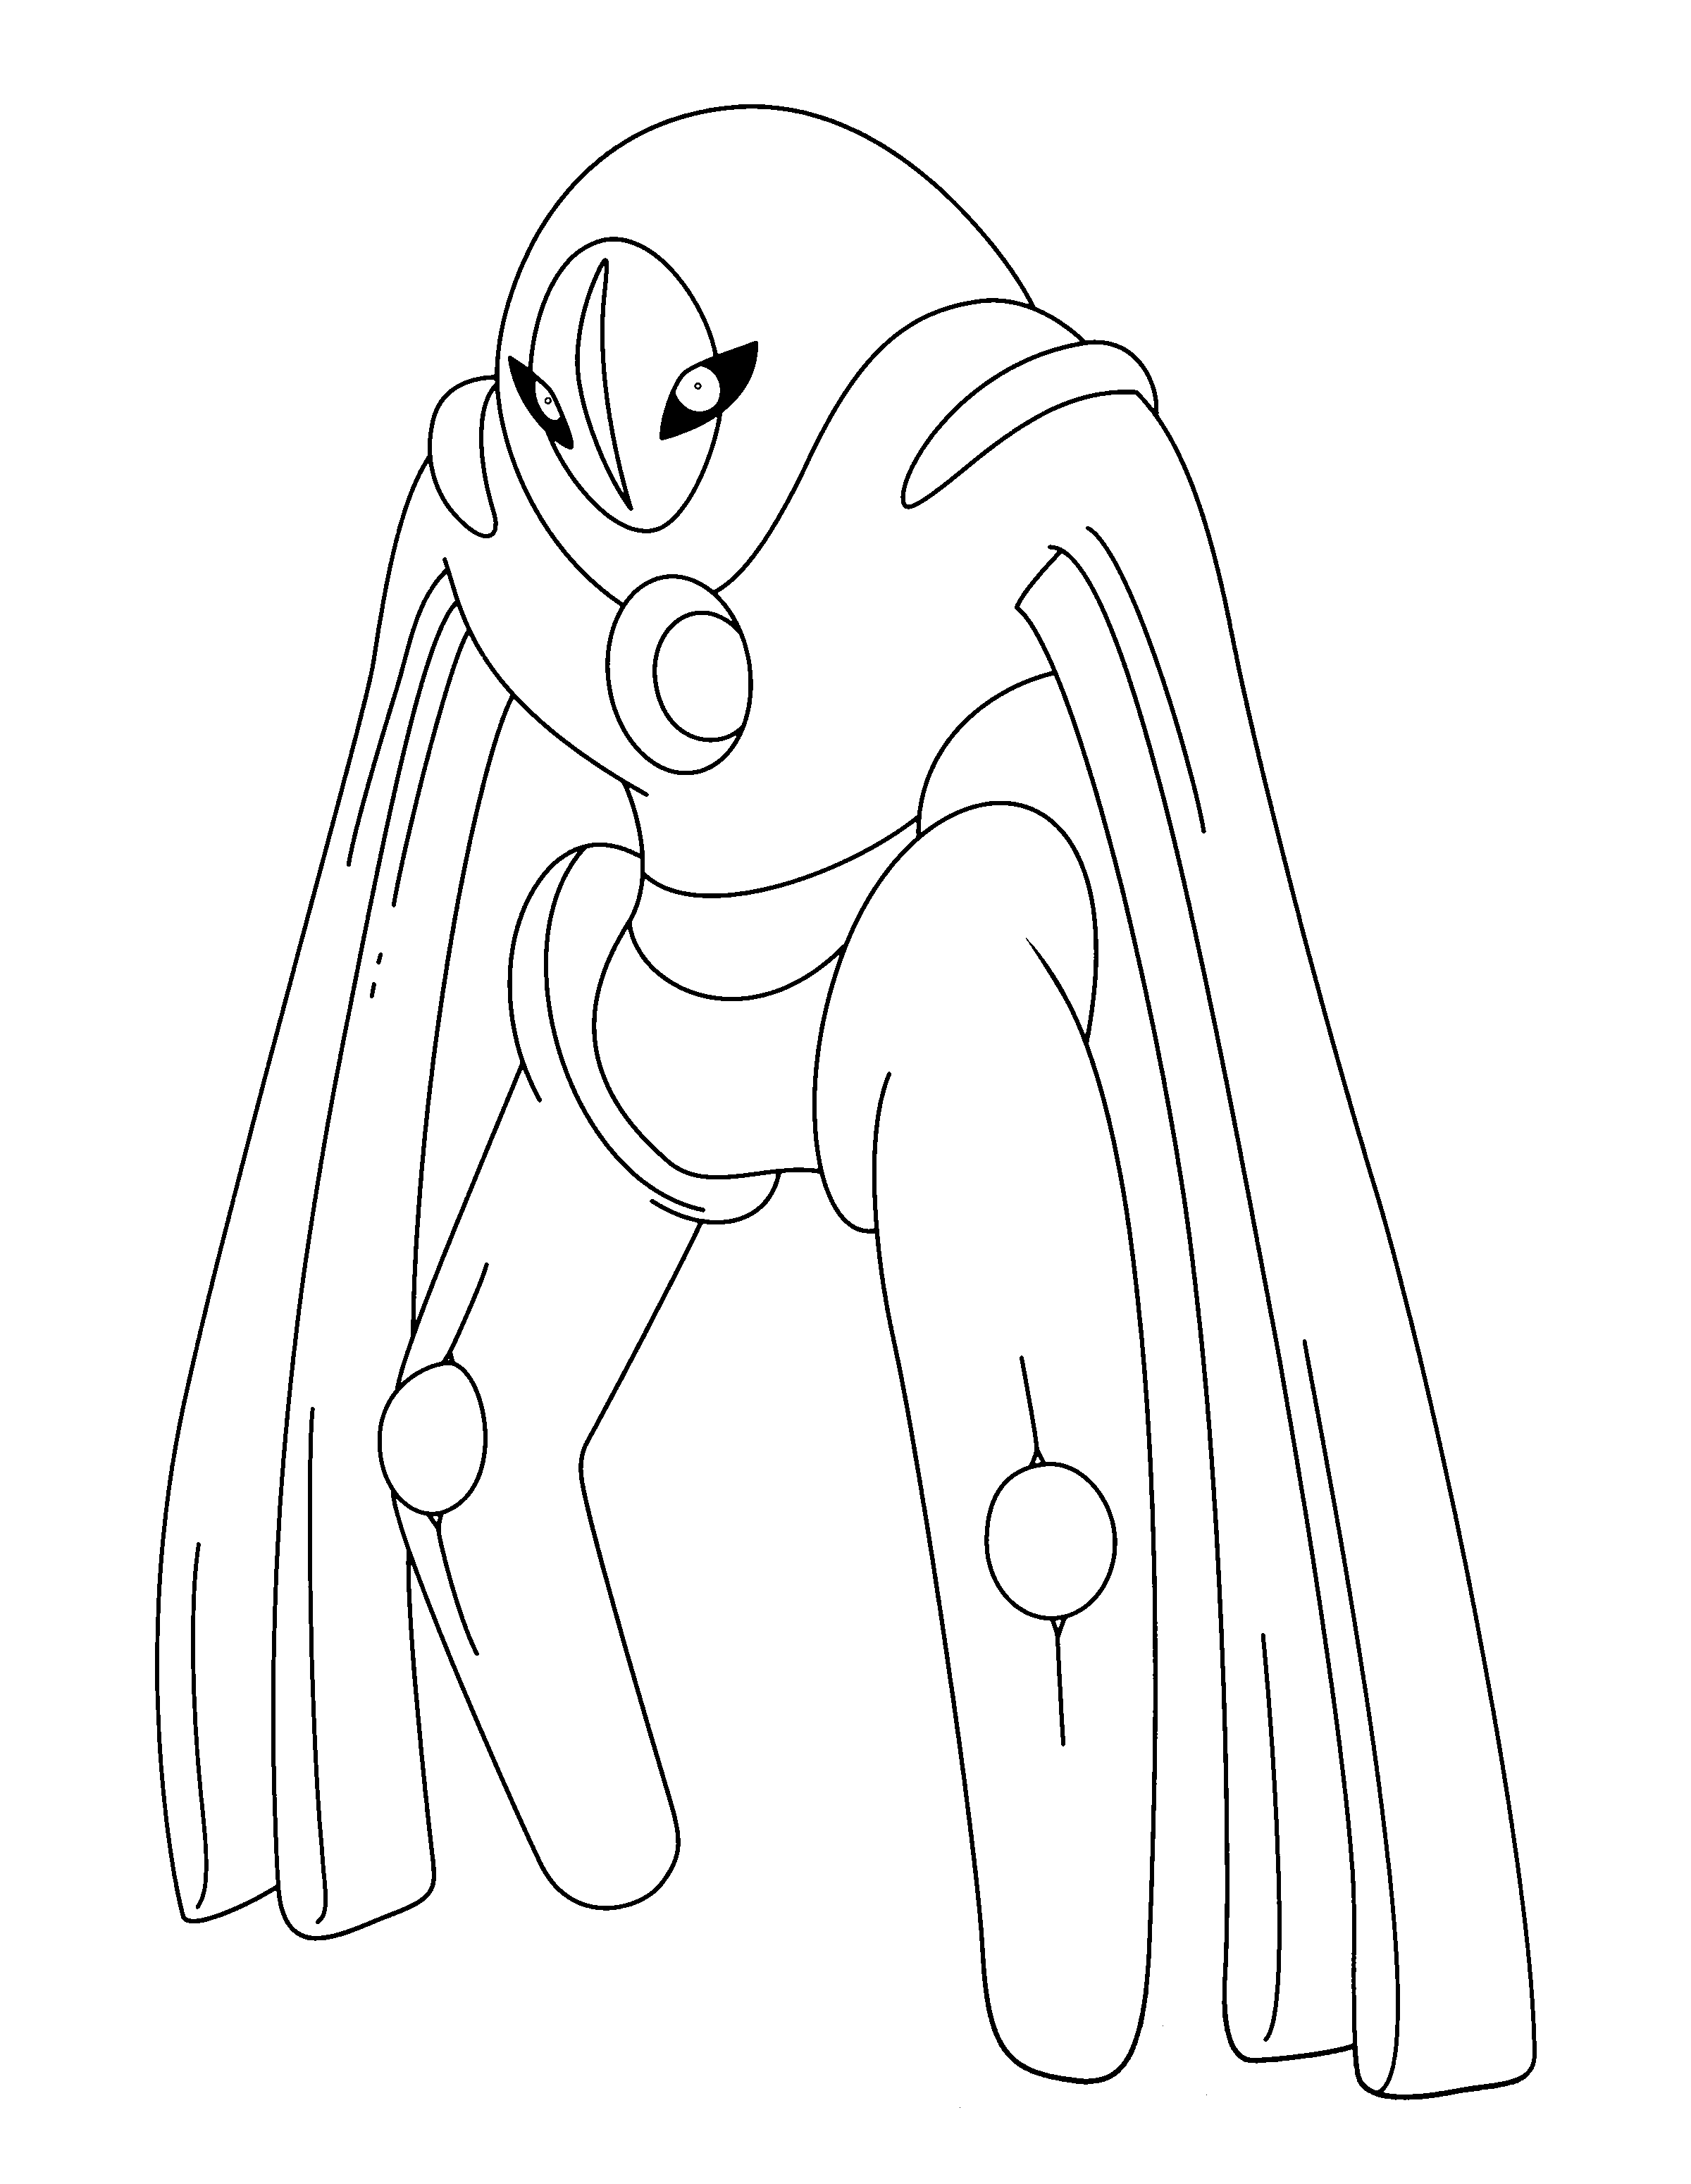 Pokemon Coloring Pages Deoxys